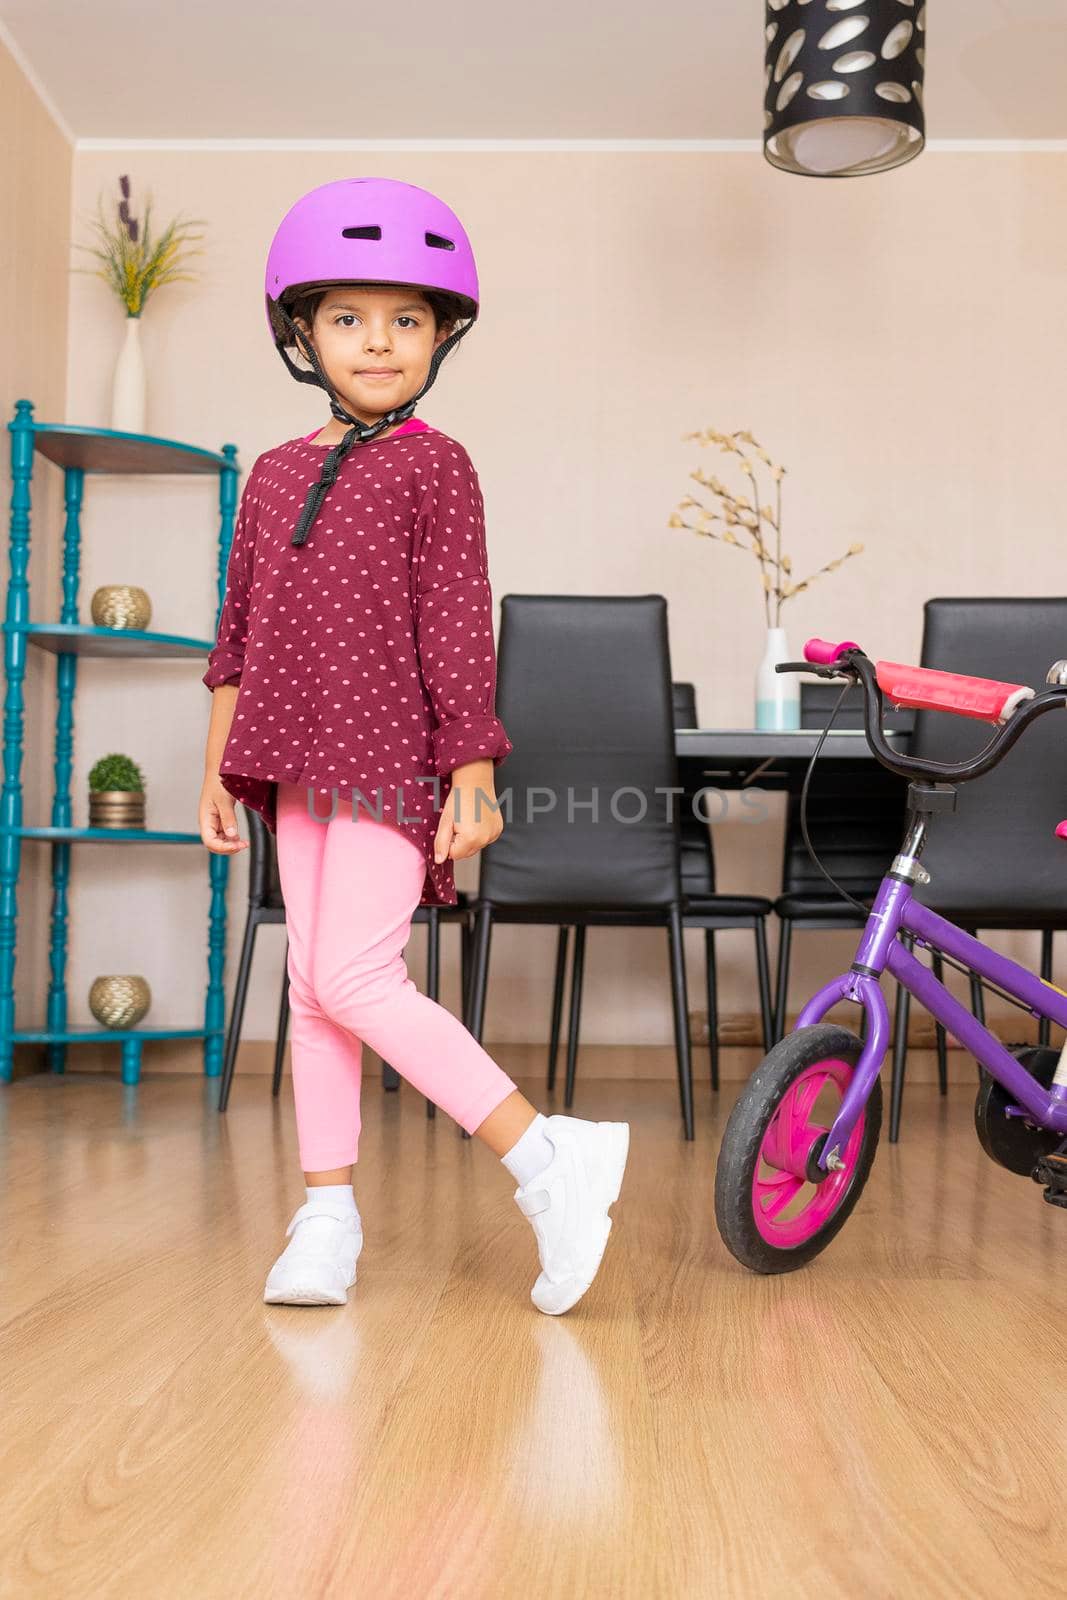 Little girl playing her bicycle in the living room of the apartment during quarantine